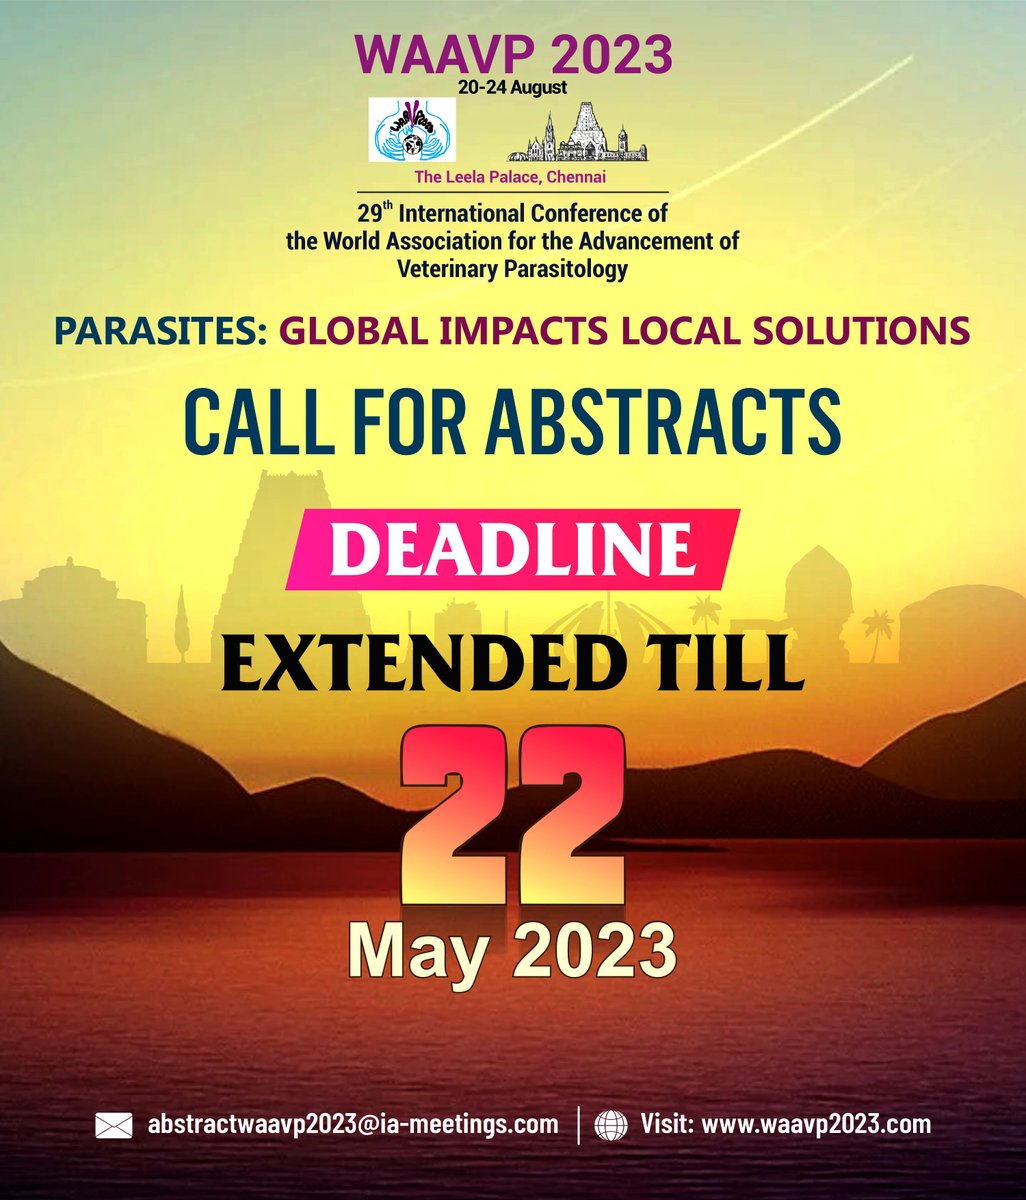 Attention veterinarians and parasitologists! Abstract submission for the 29th International Conference of the World Association for the Advancement of Veterinary Parasitology has been extended till 22nd May 2023. Submit your abstract now: waavp2023.com #WAAVP2023